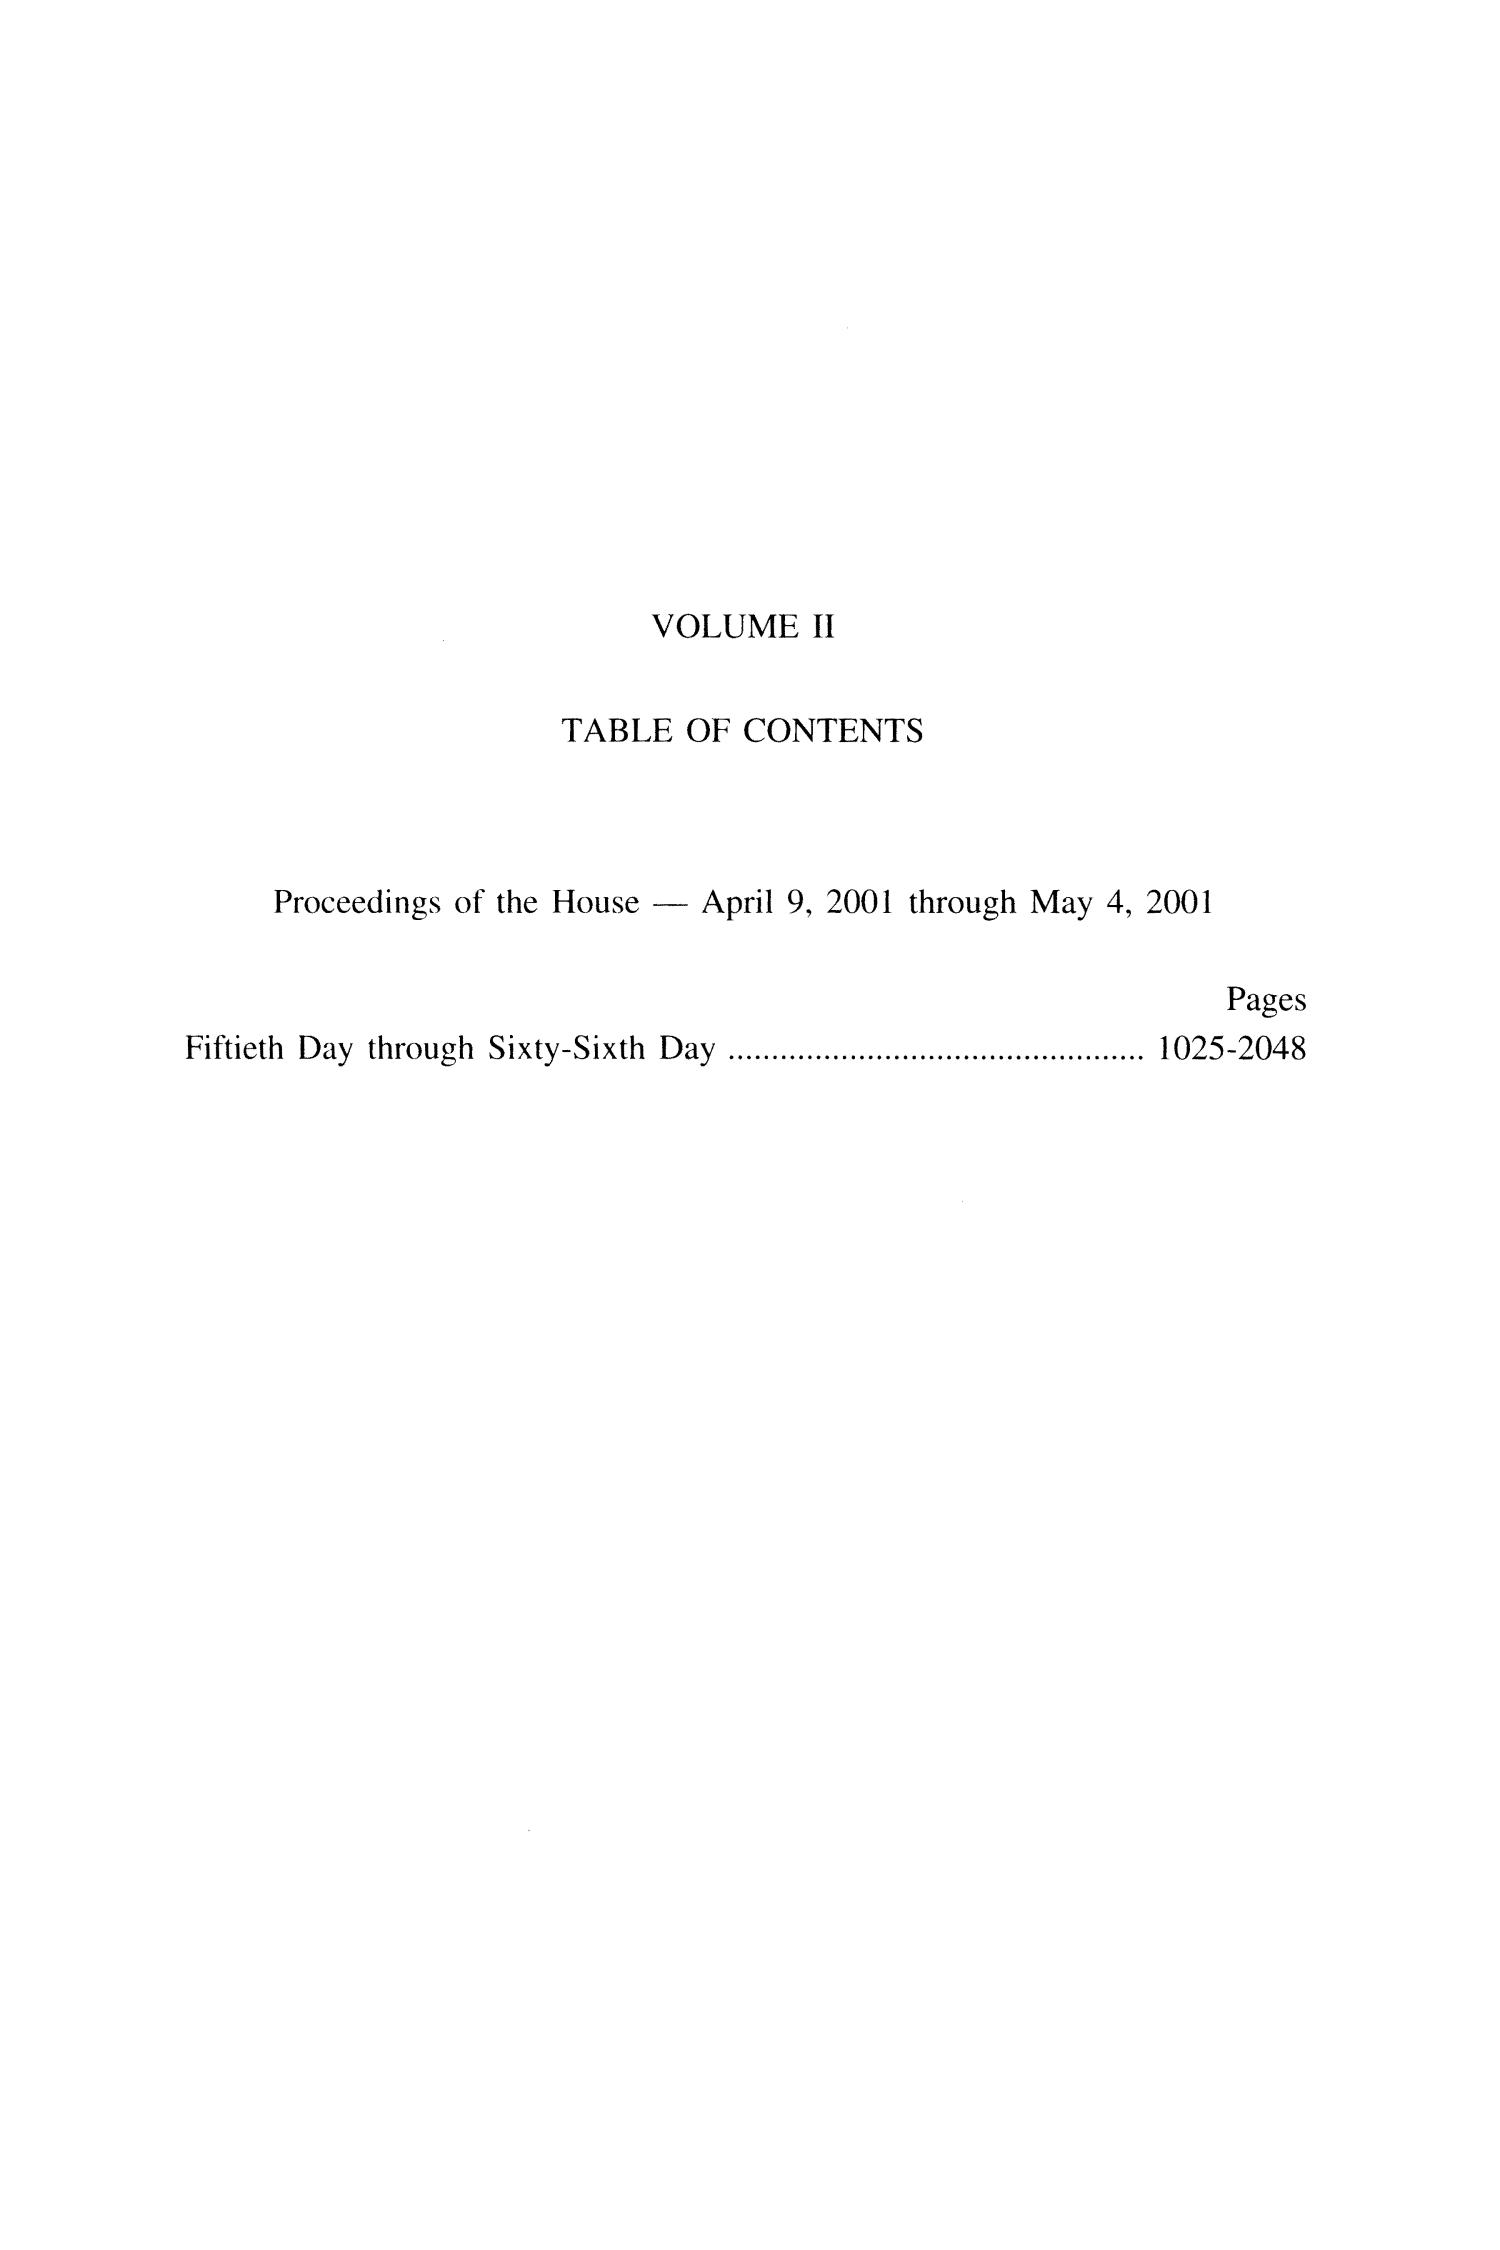 Journal of the House of Representatives of the Regular Session of the Seventy-Seventh Legislature of the State of Texas, Volume 2
                                                
                                                    None
                                                